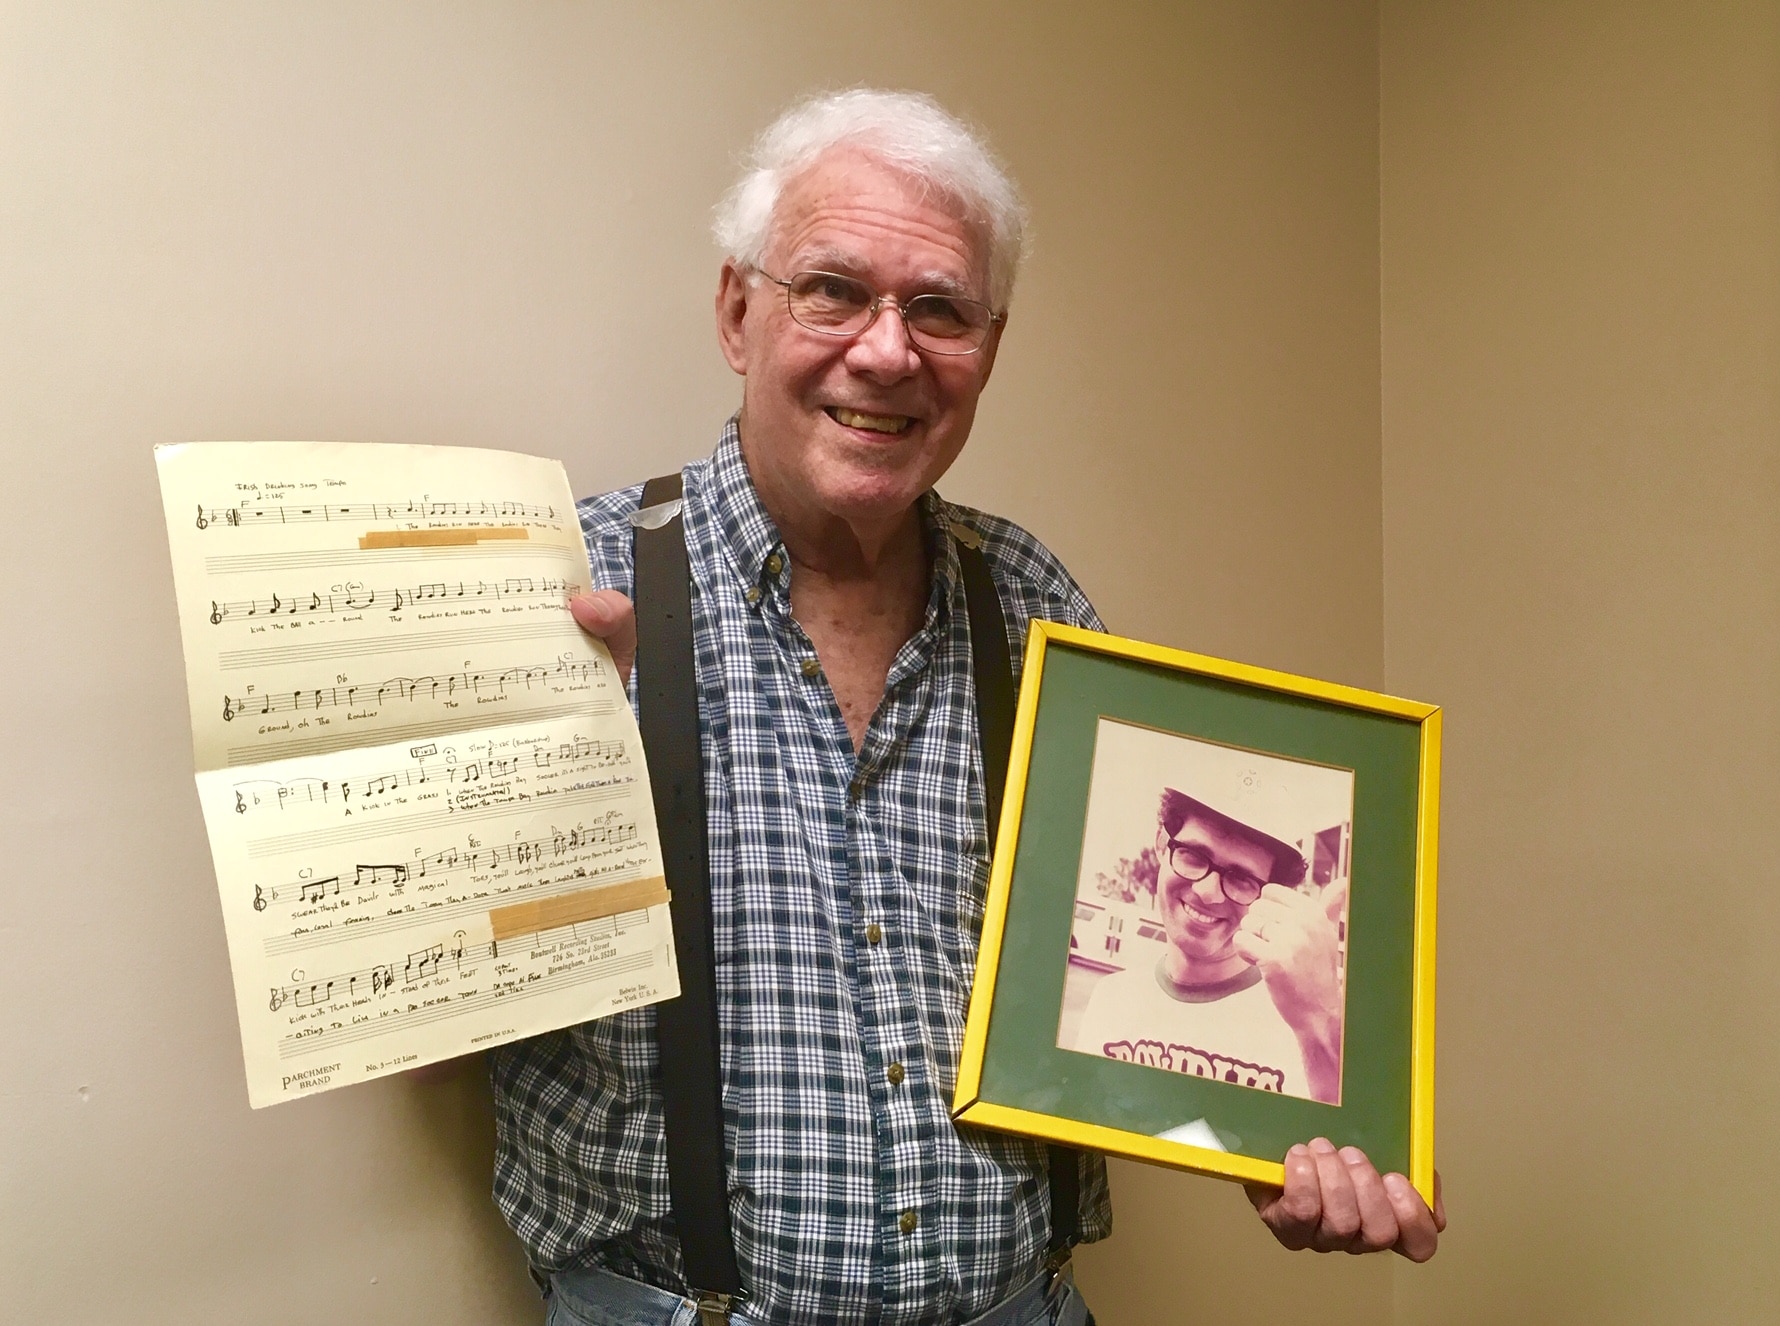 Ed Boutwell with the Tampa Bay Rowdies song sheet